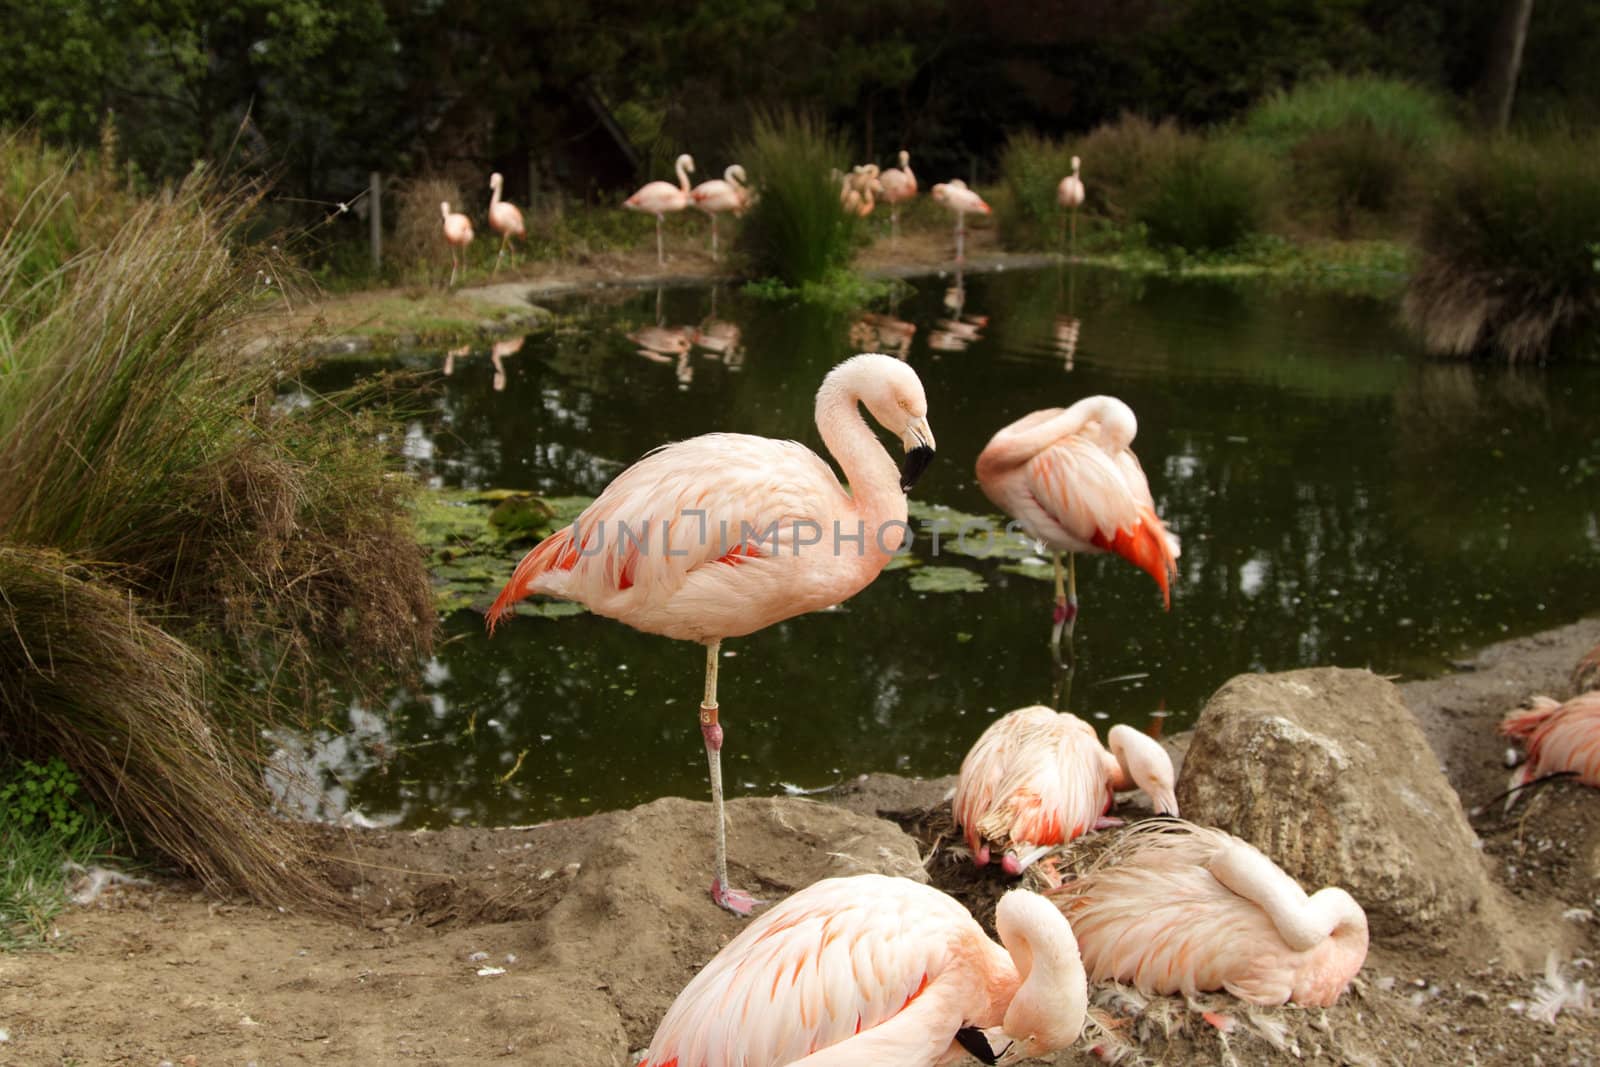 A group of flamingos in the zoo near the pond